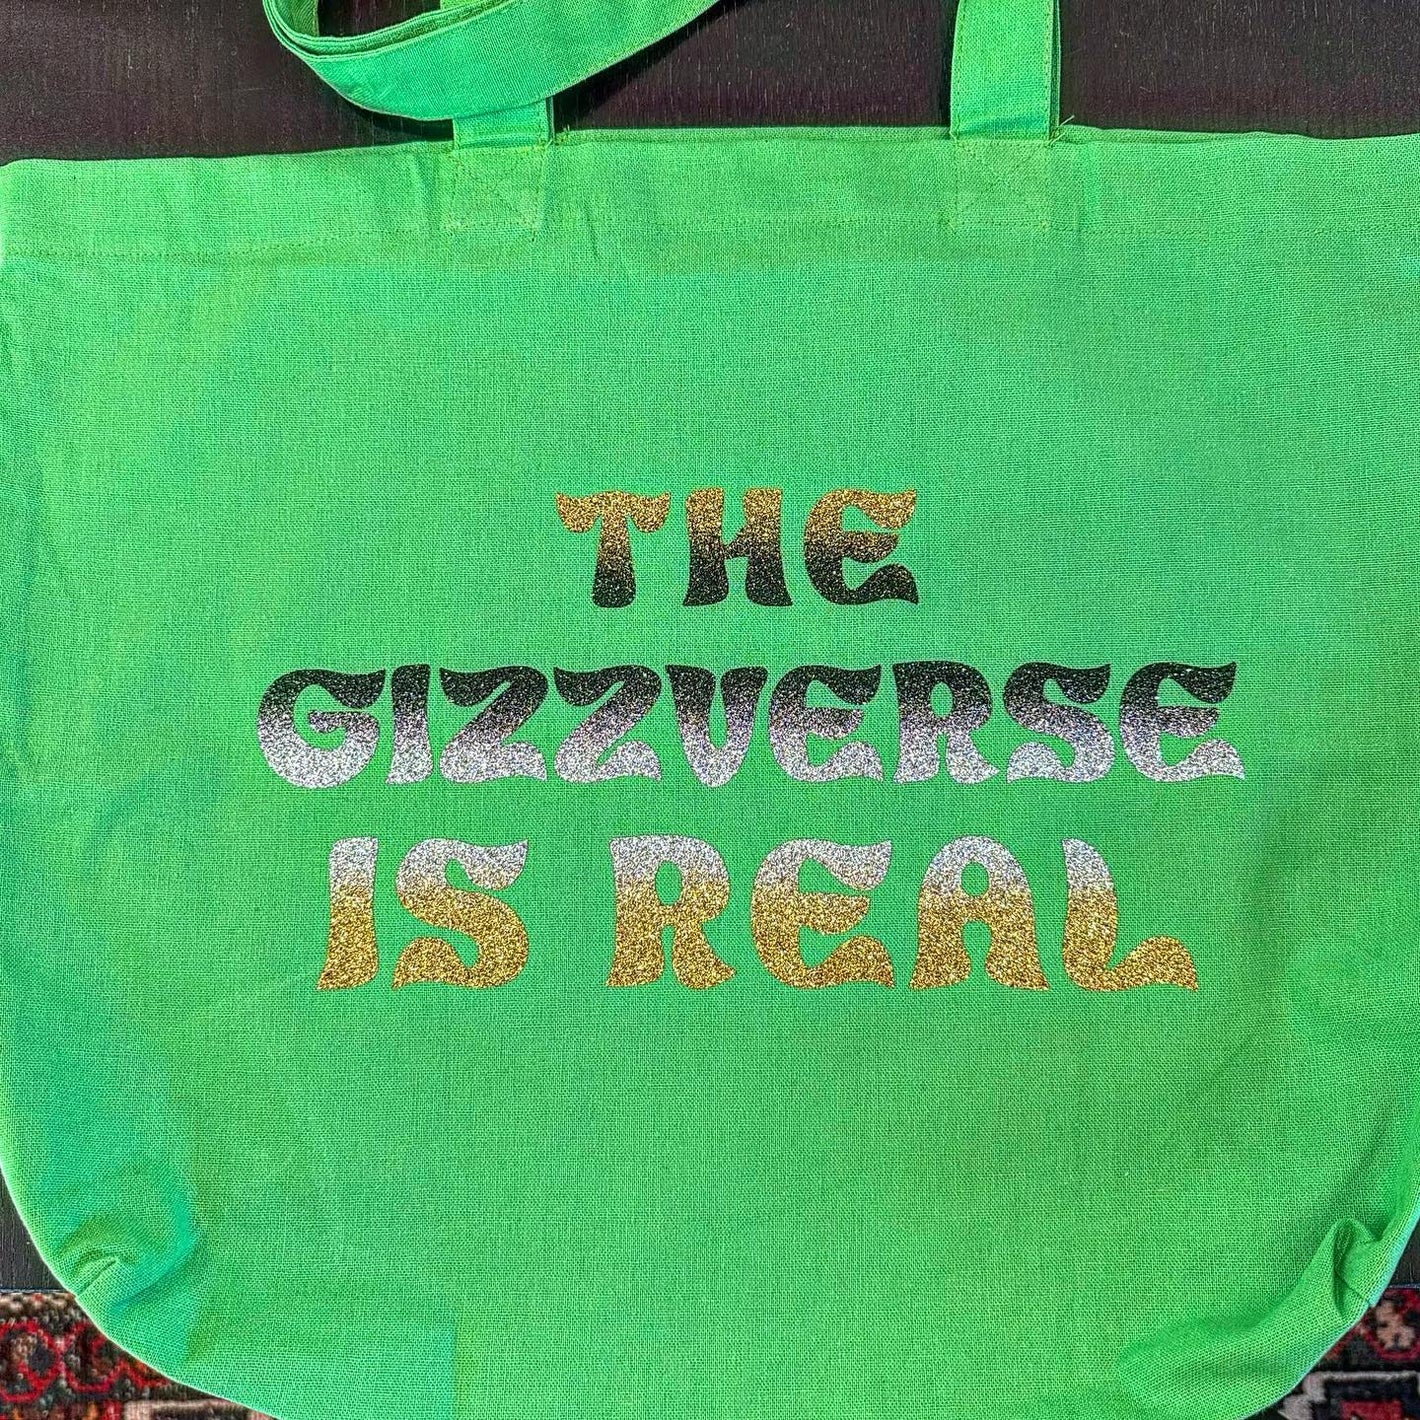 "The Gizzverse is Real" tote bag